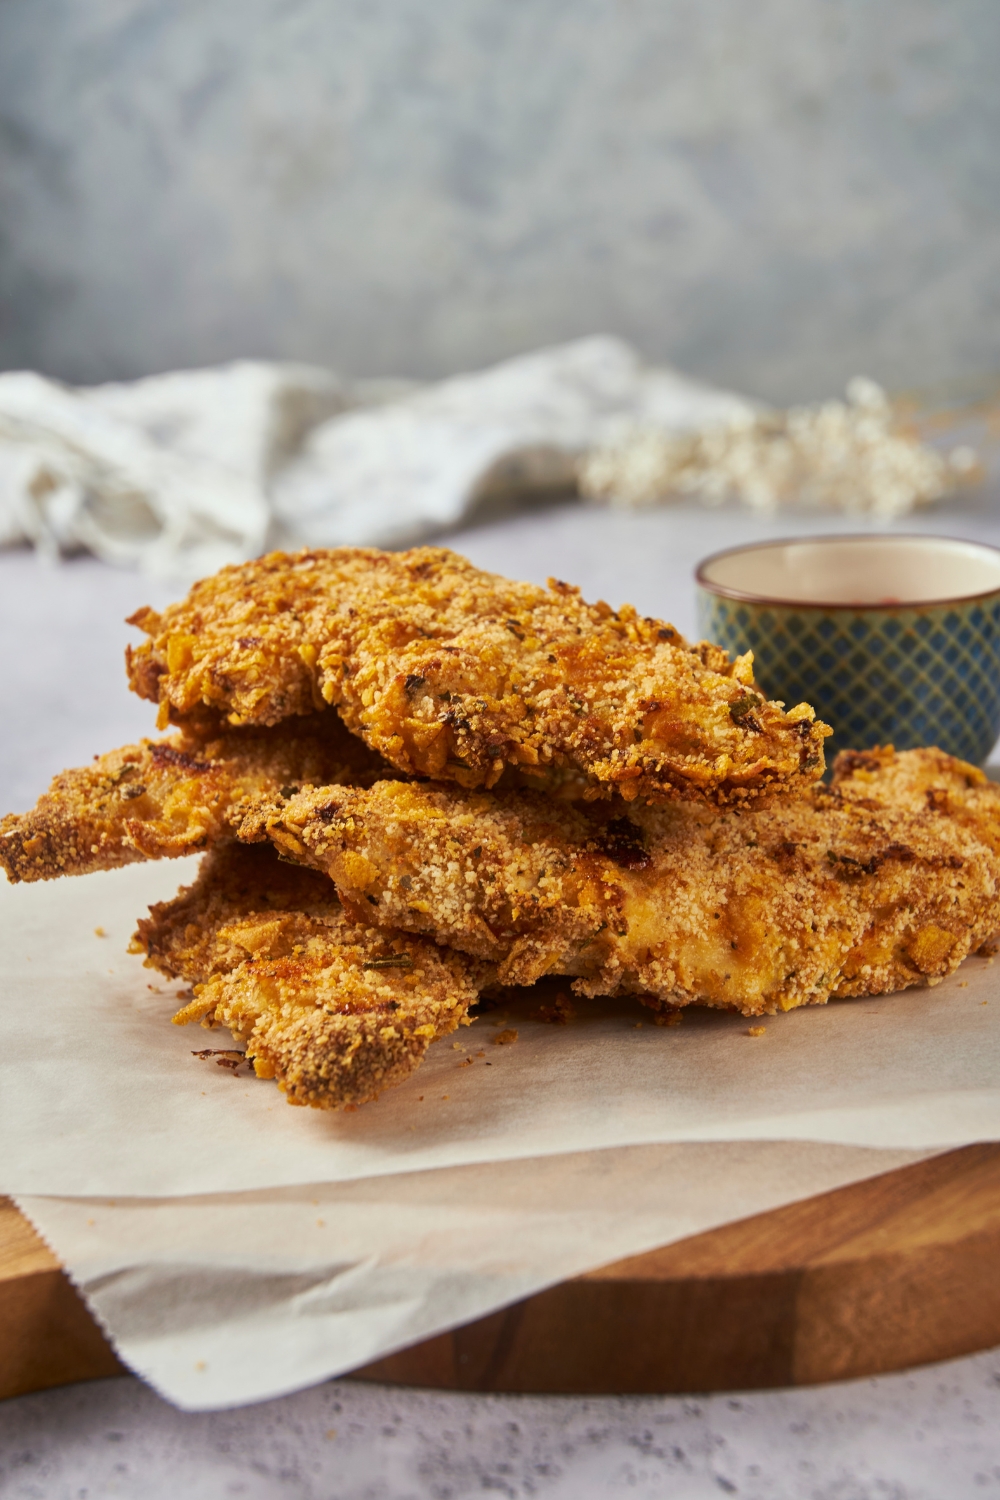 Zaxby's chicken fingers piled three-high on parchment paper on top of a wooden board with dipping sauce.